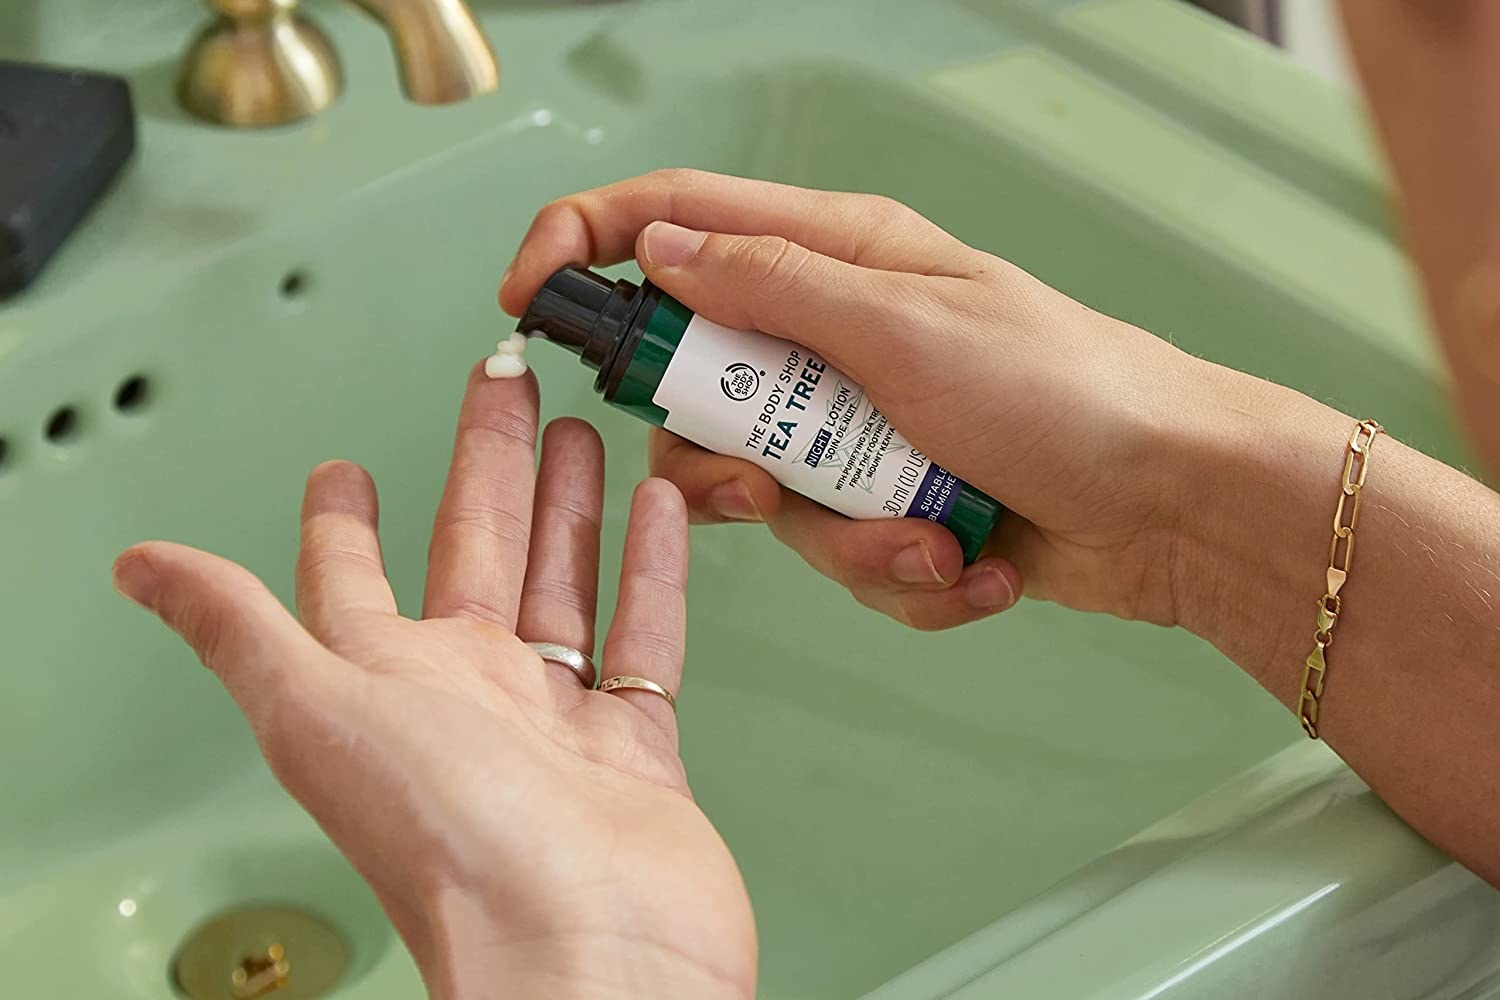 a person pumping some of the moisturizer onto their hand above a green sink